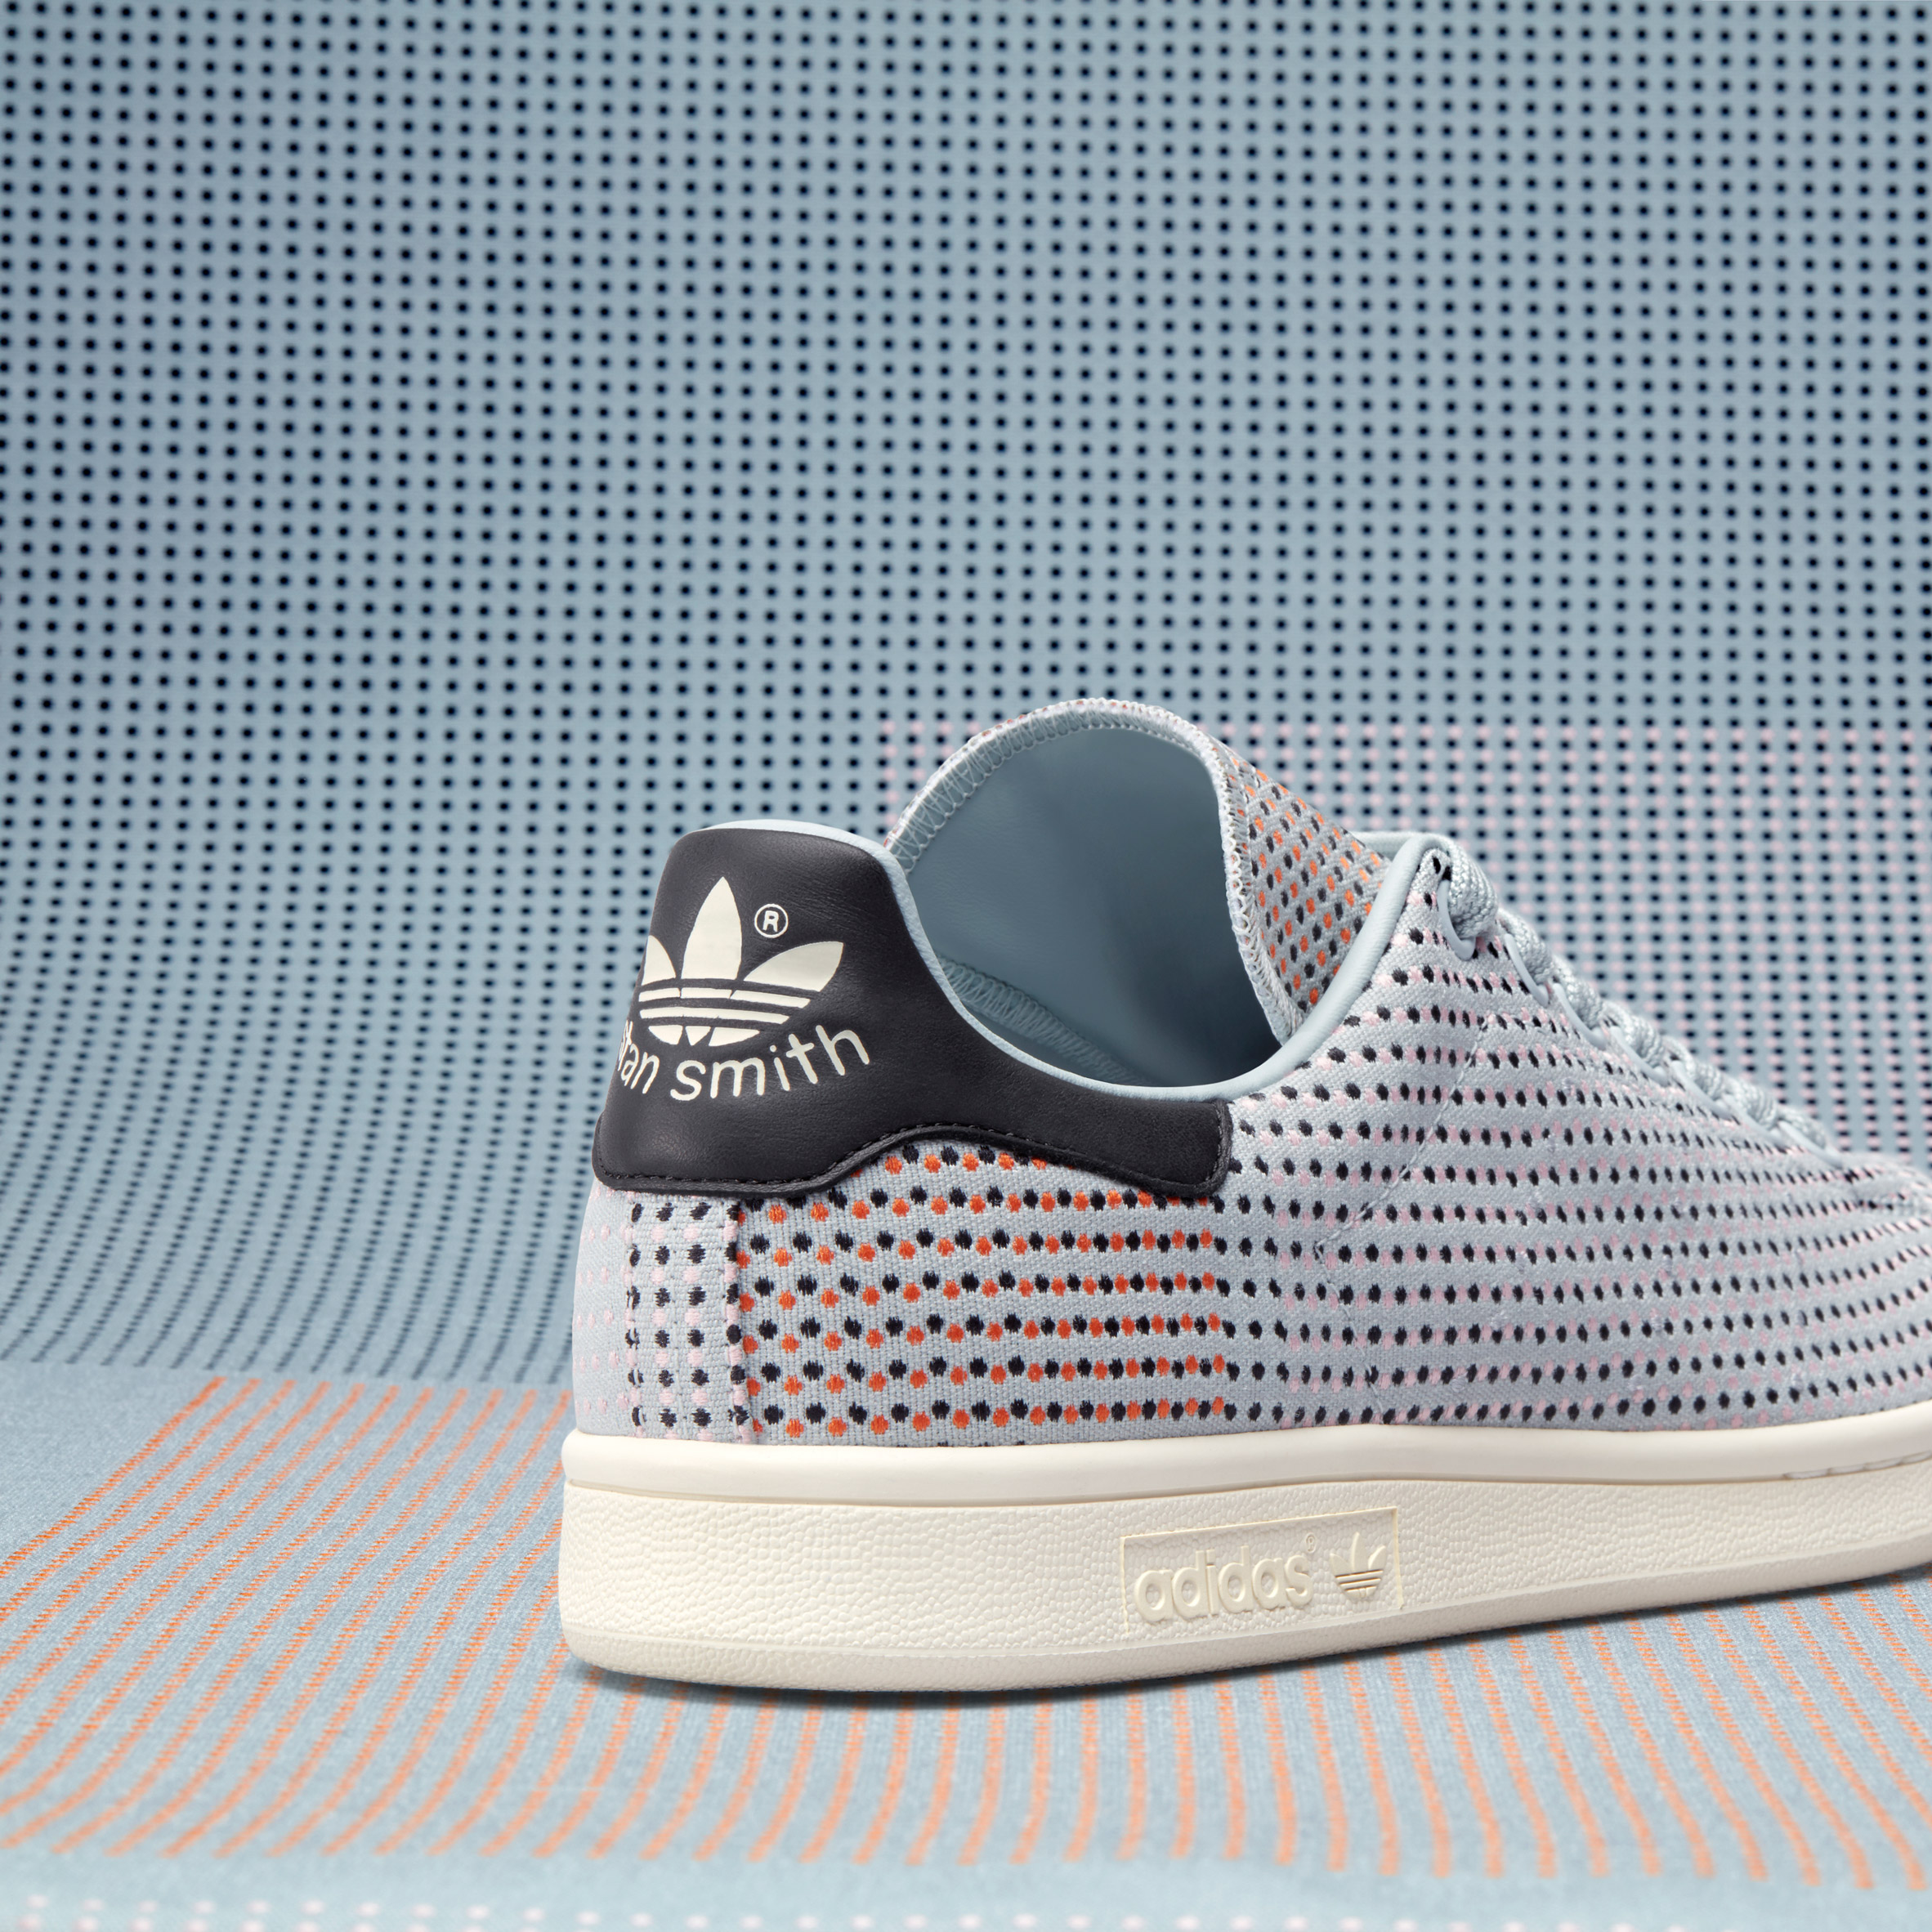 Manifold tvivl Overleve Adidas unveils special-edition Stan Smith trainers with Kvadrat fabric